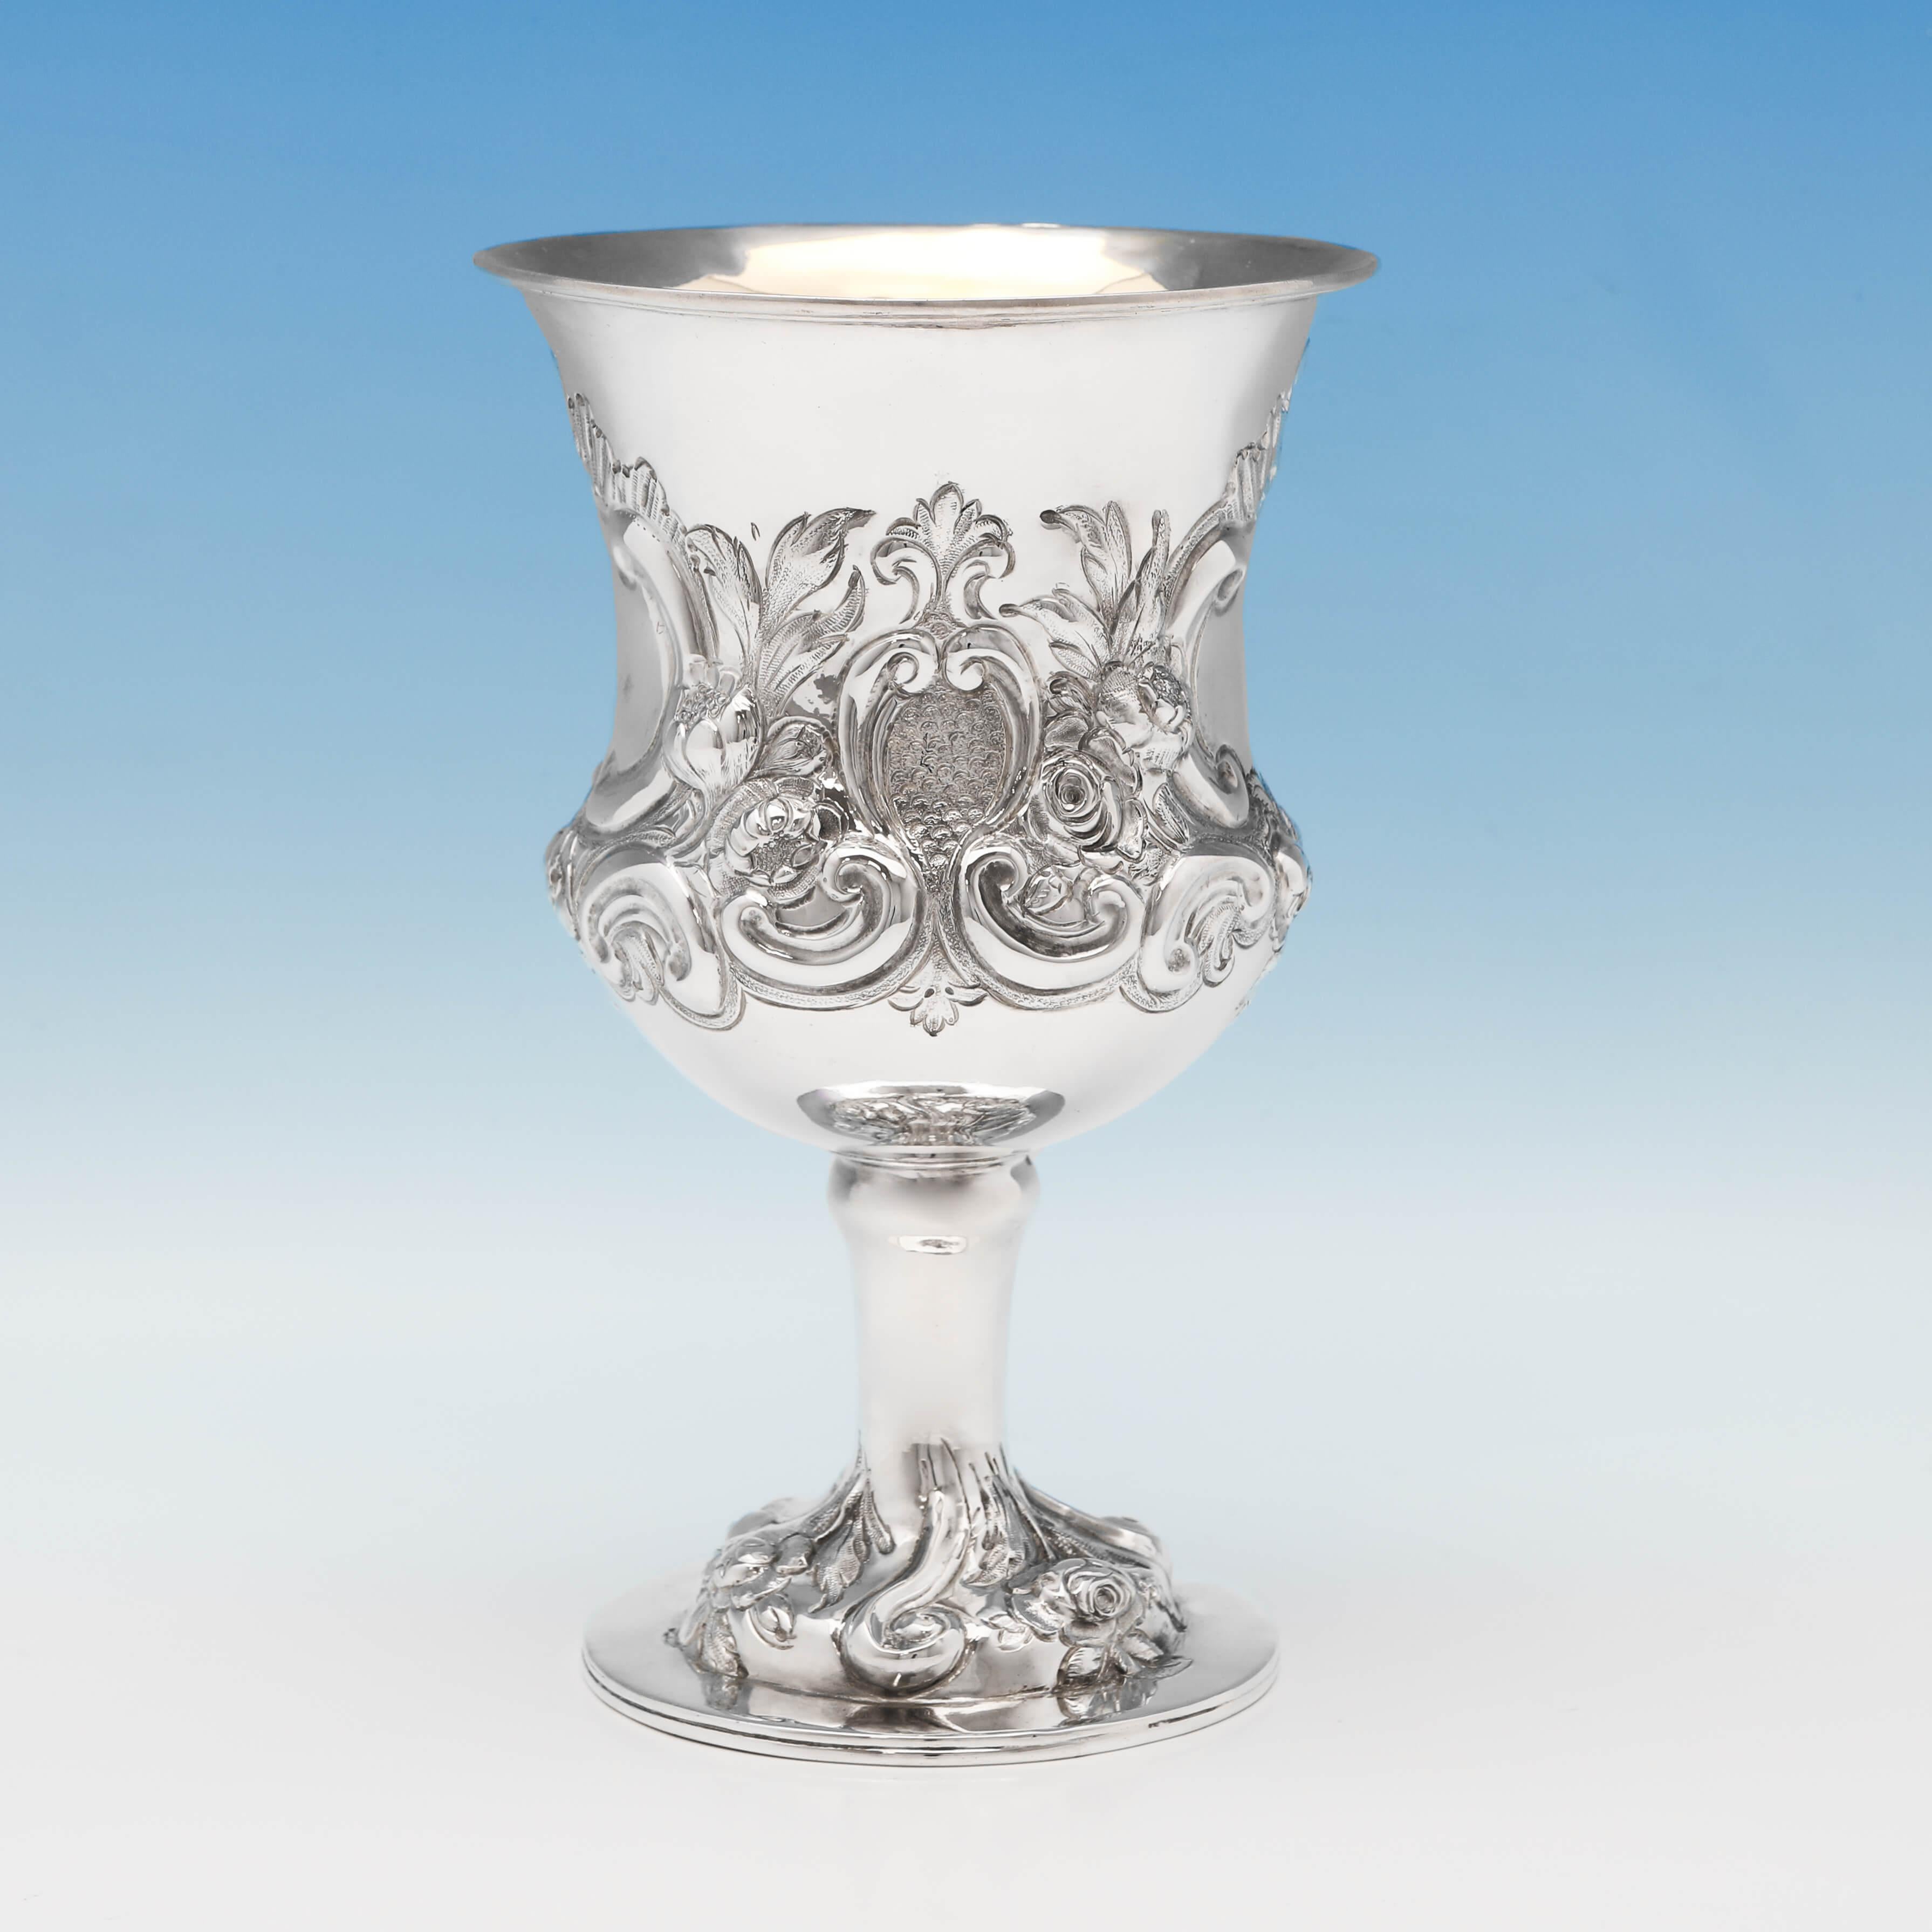 Hallmarked in London in 1864 by Charles Boyton, this attractive, Victorian, antique sterling silver goblet, is in the 'campagna' shape, and features a gilt interior, and chased floral and scroll decoration. The goblet measures: 7.5